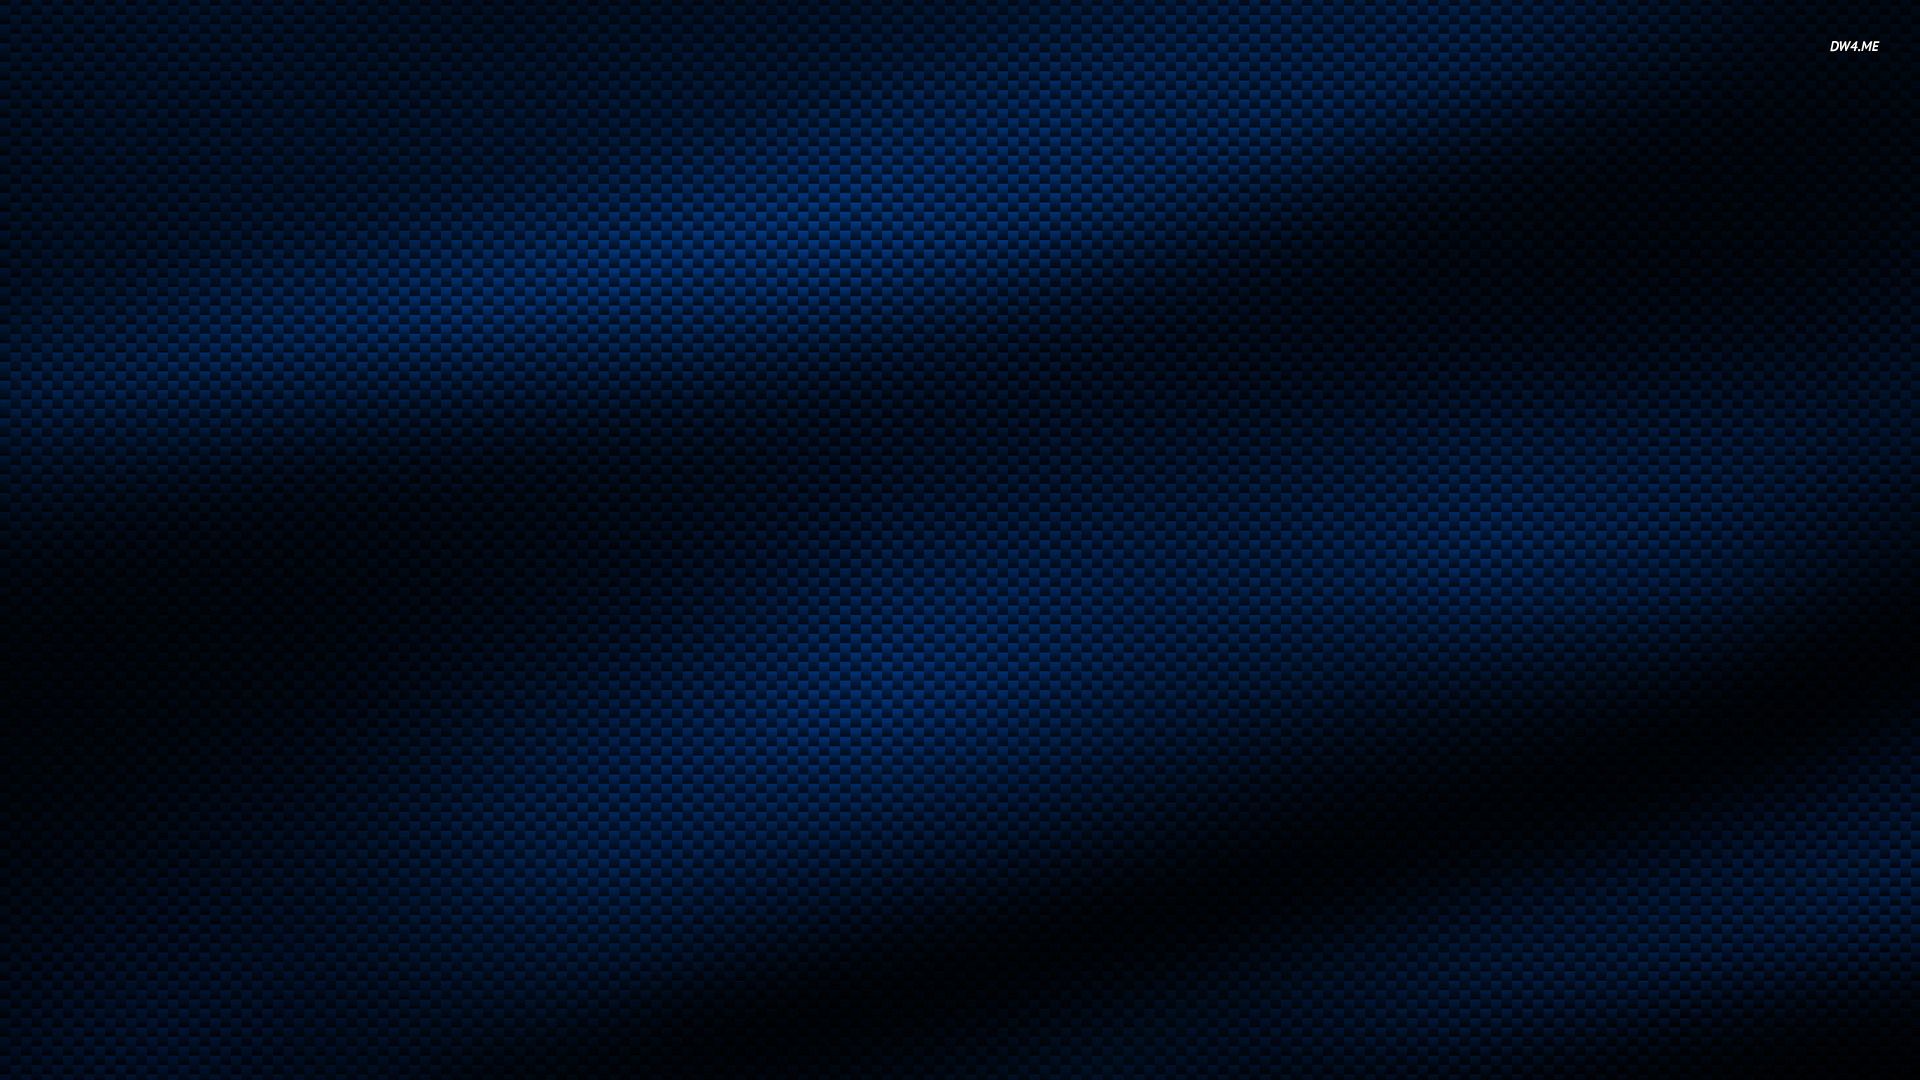 Carbon fiber fabric wallpaper - Abstract wallpapers - #869